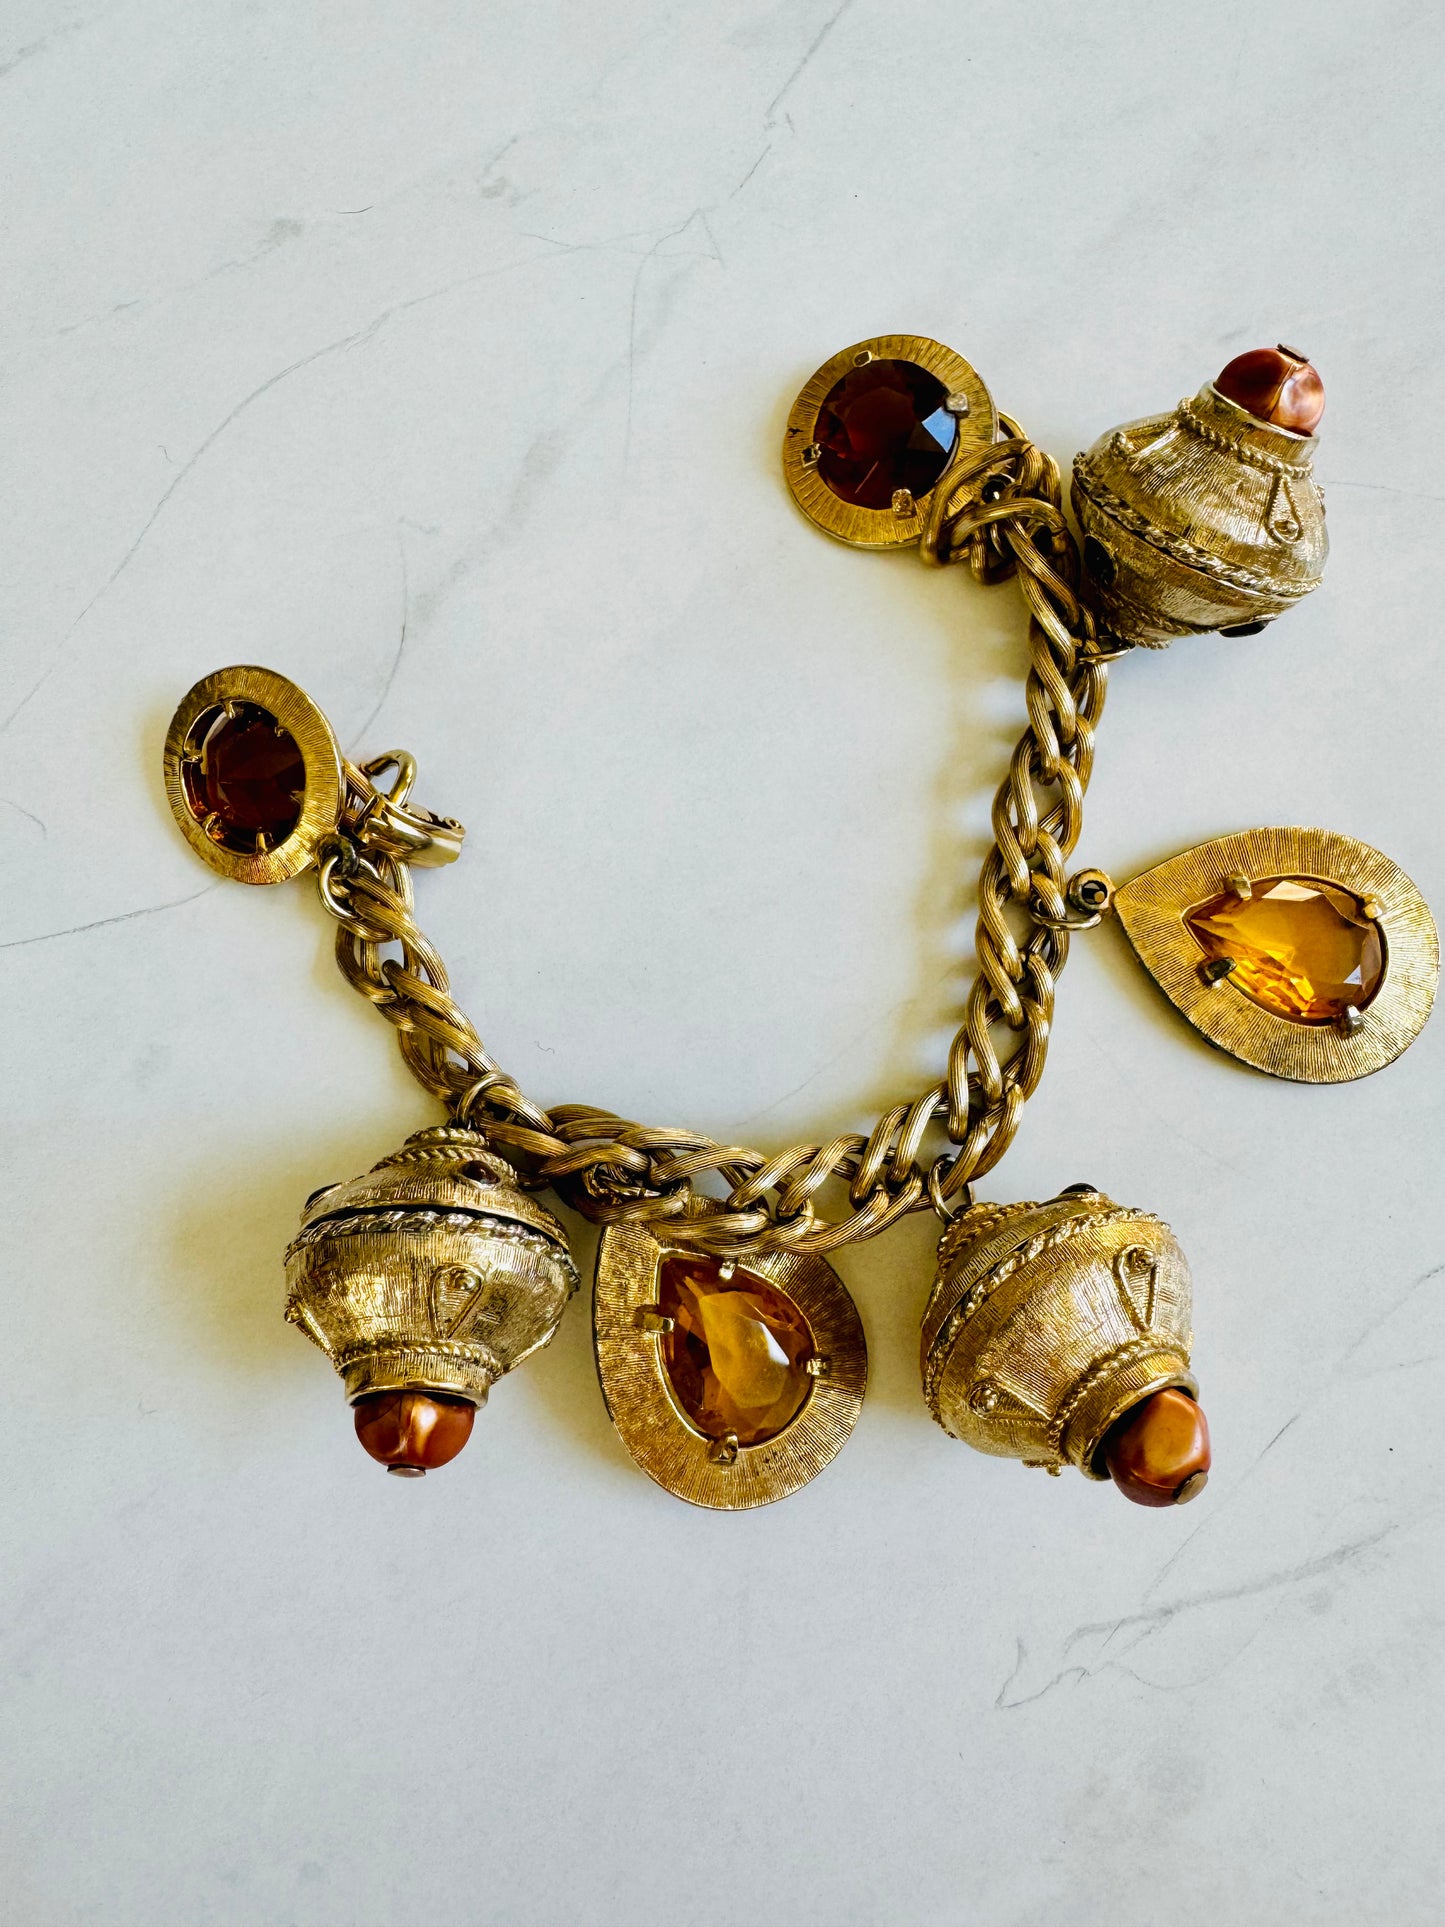 Vintage 1950s jumbo charm bracelet. Gold tone with amber charms